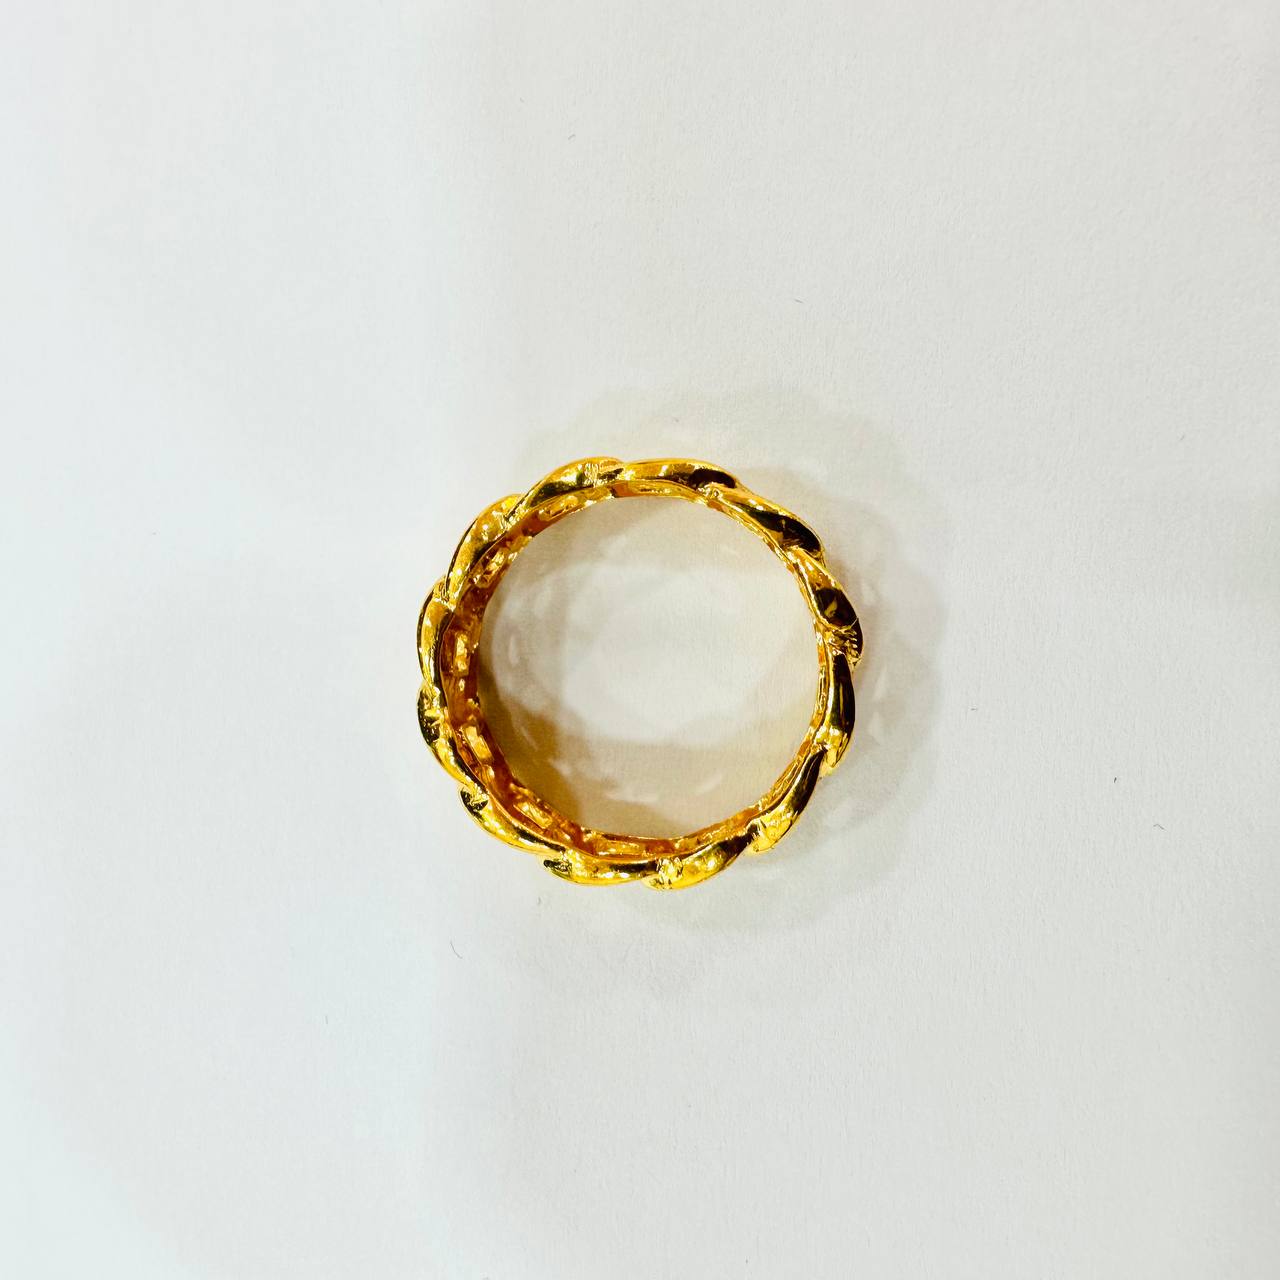 22k / 916 Gold Full Coco Ring-916 gold-Best Gold Shop